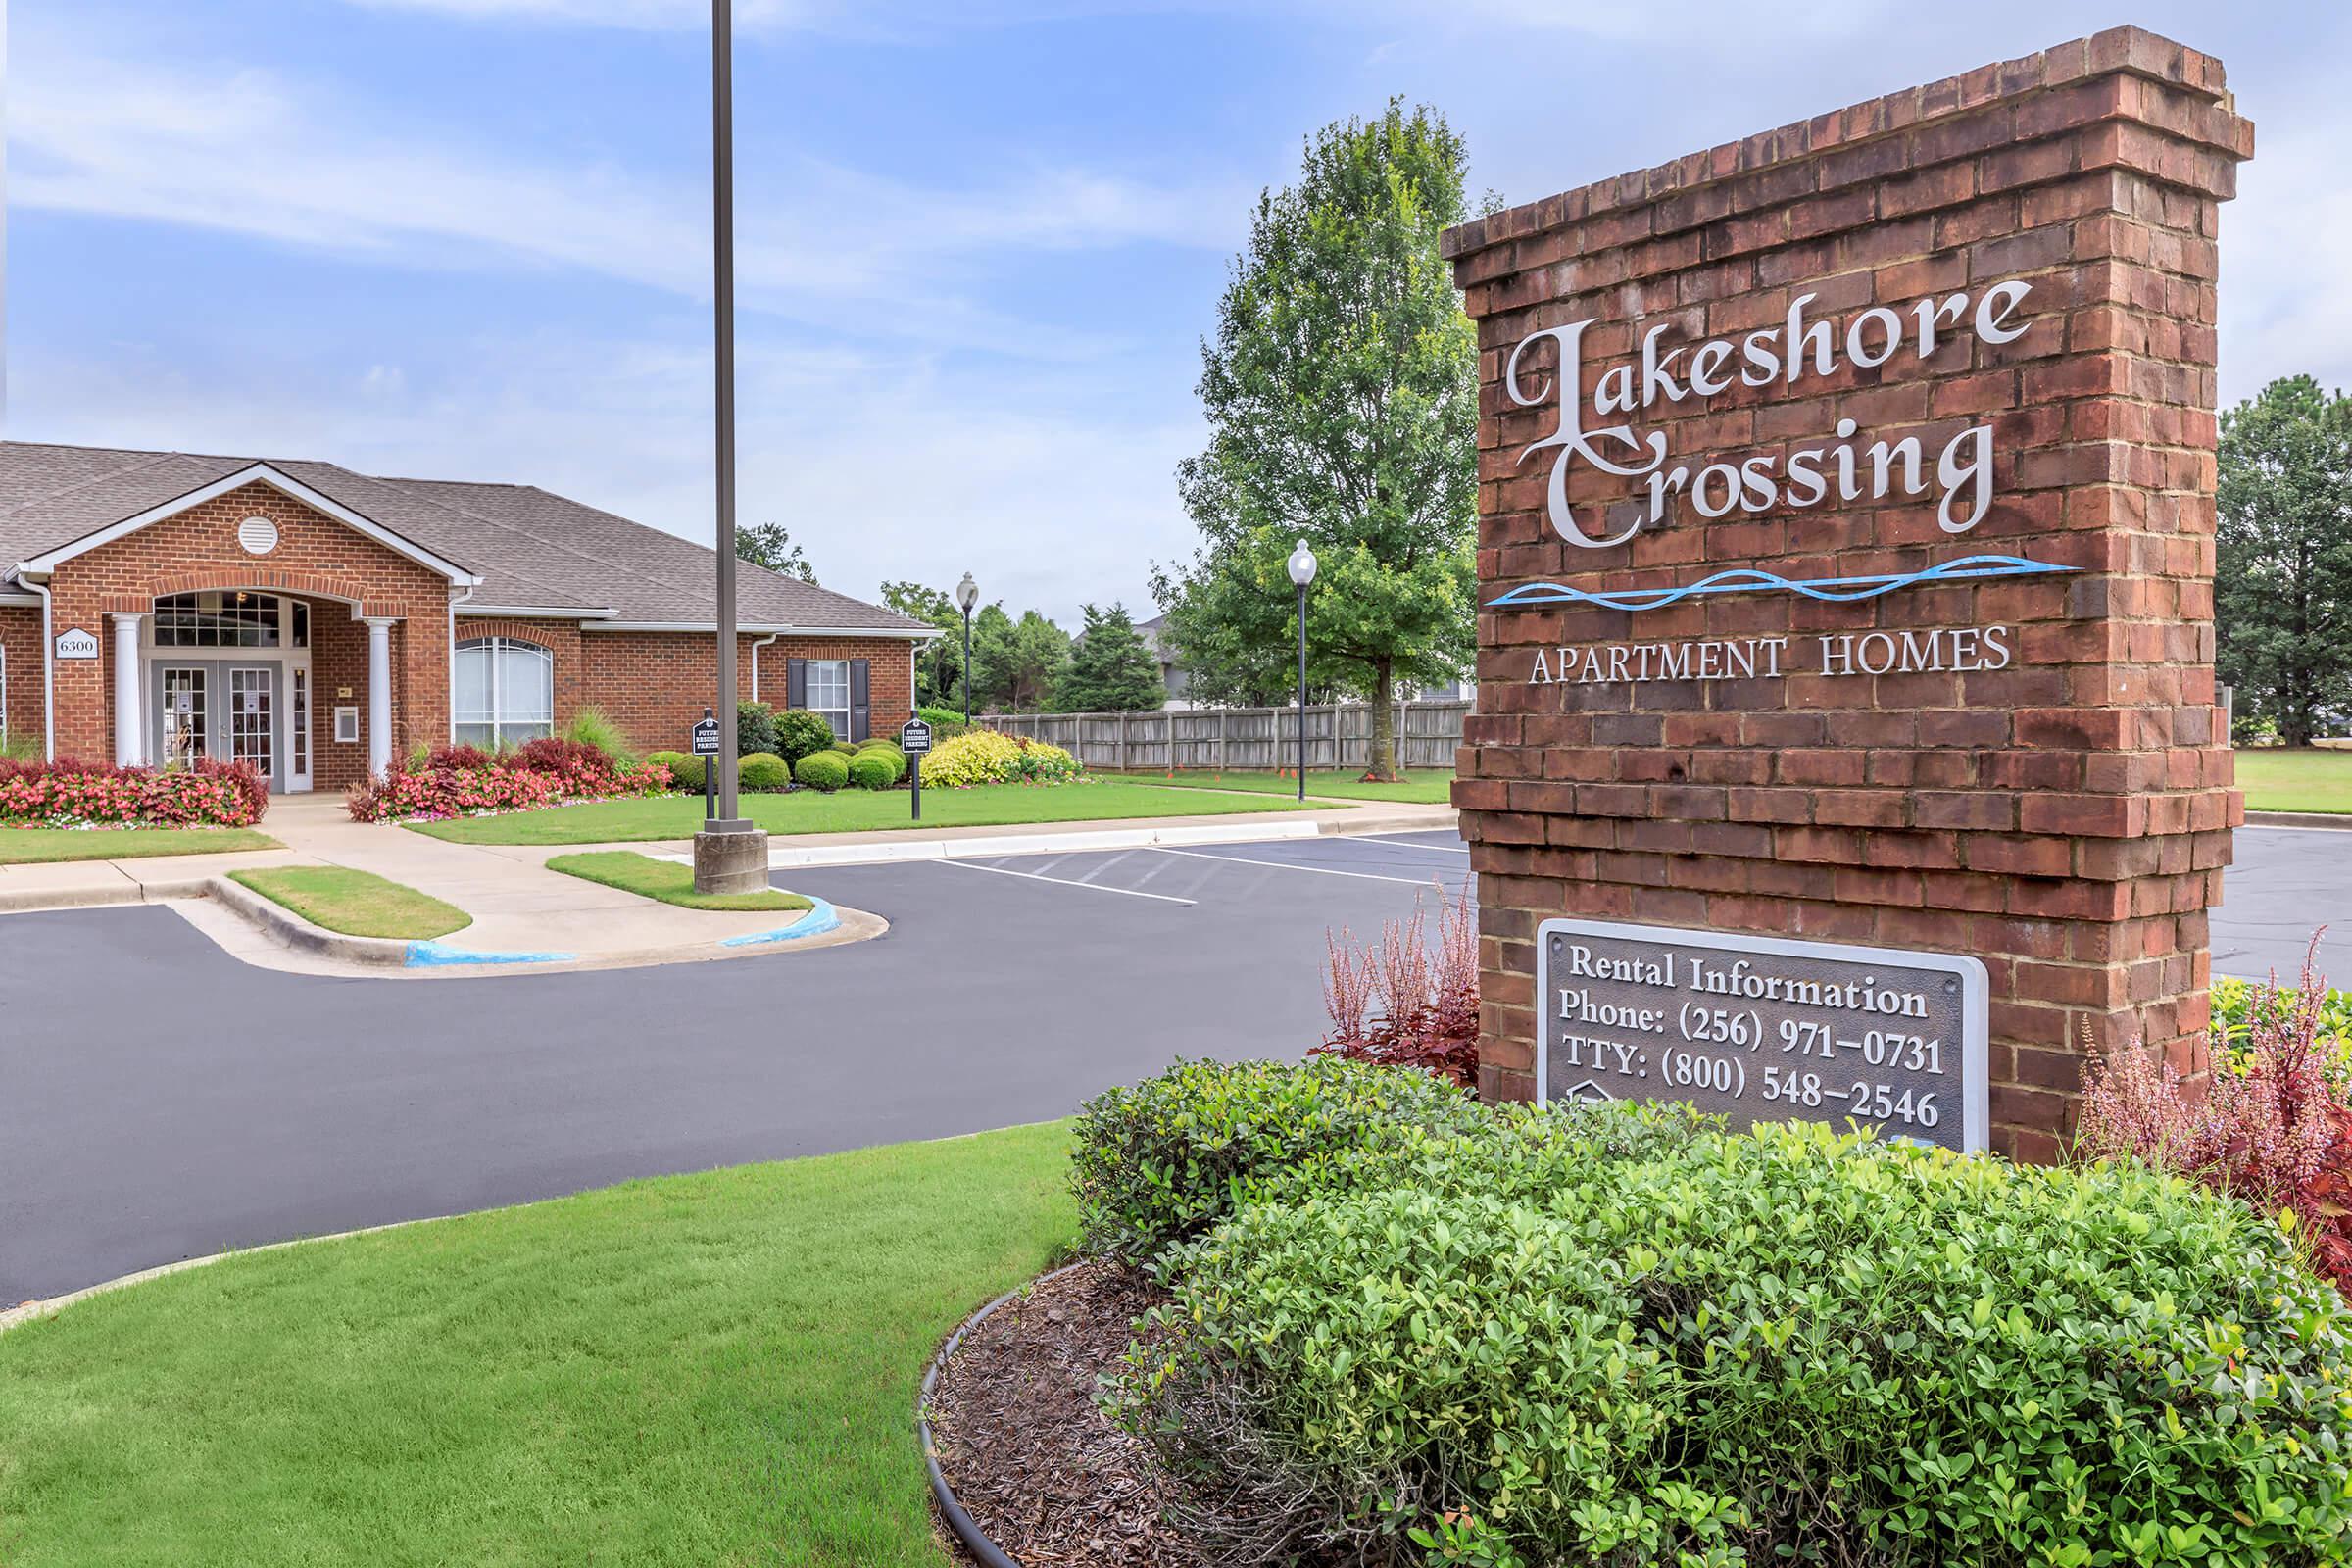 Welcome to the Lakeshore Crossing Apartments in Huntsville, TX